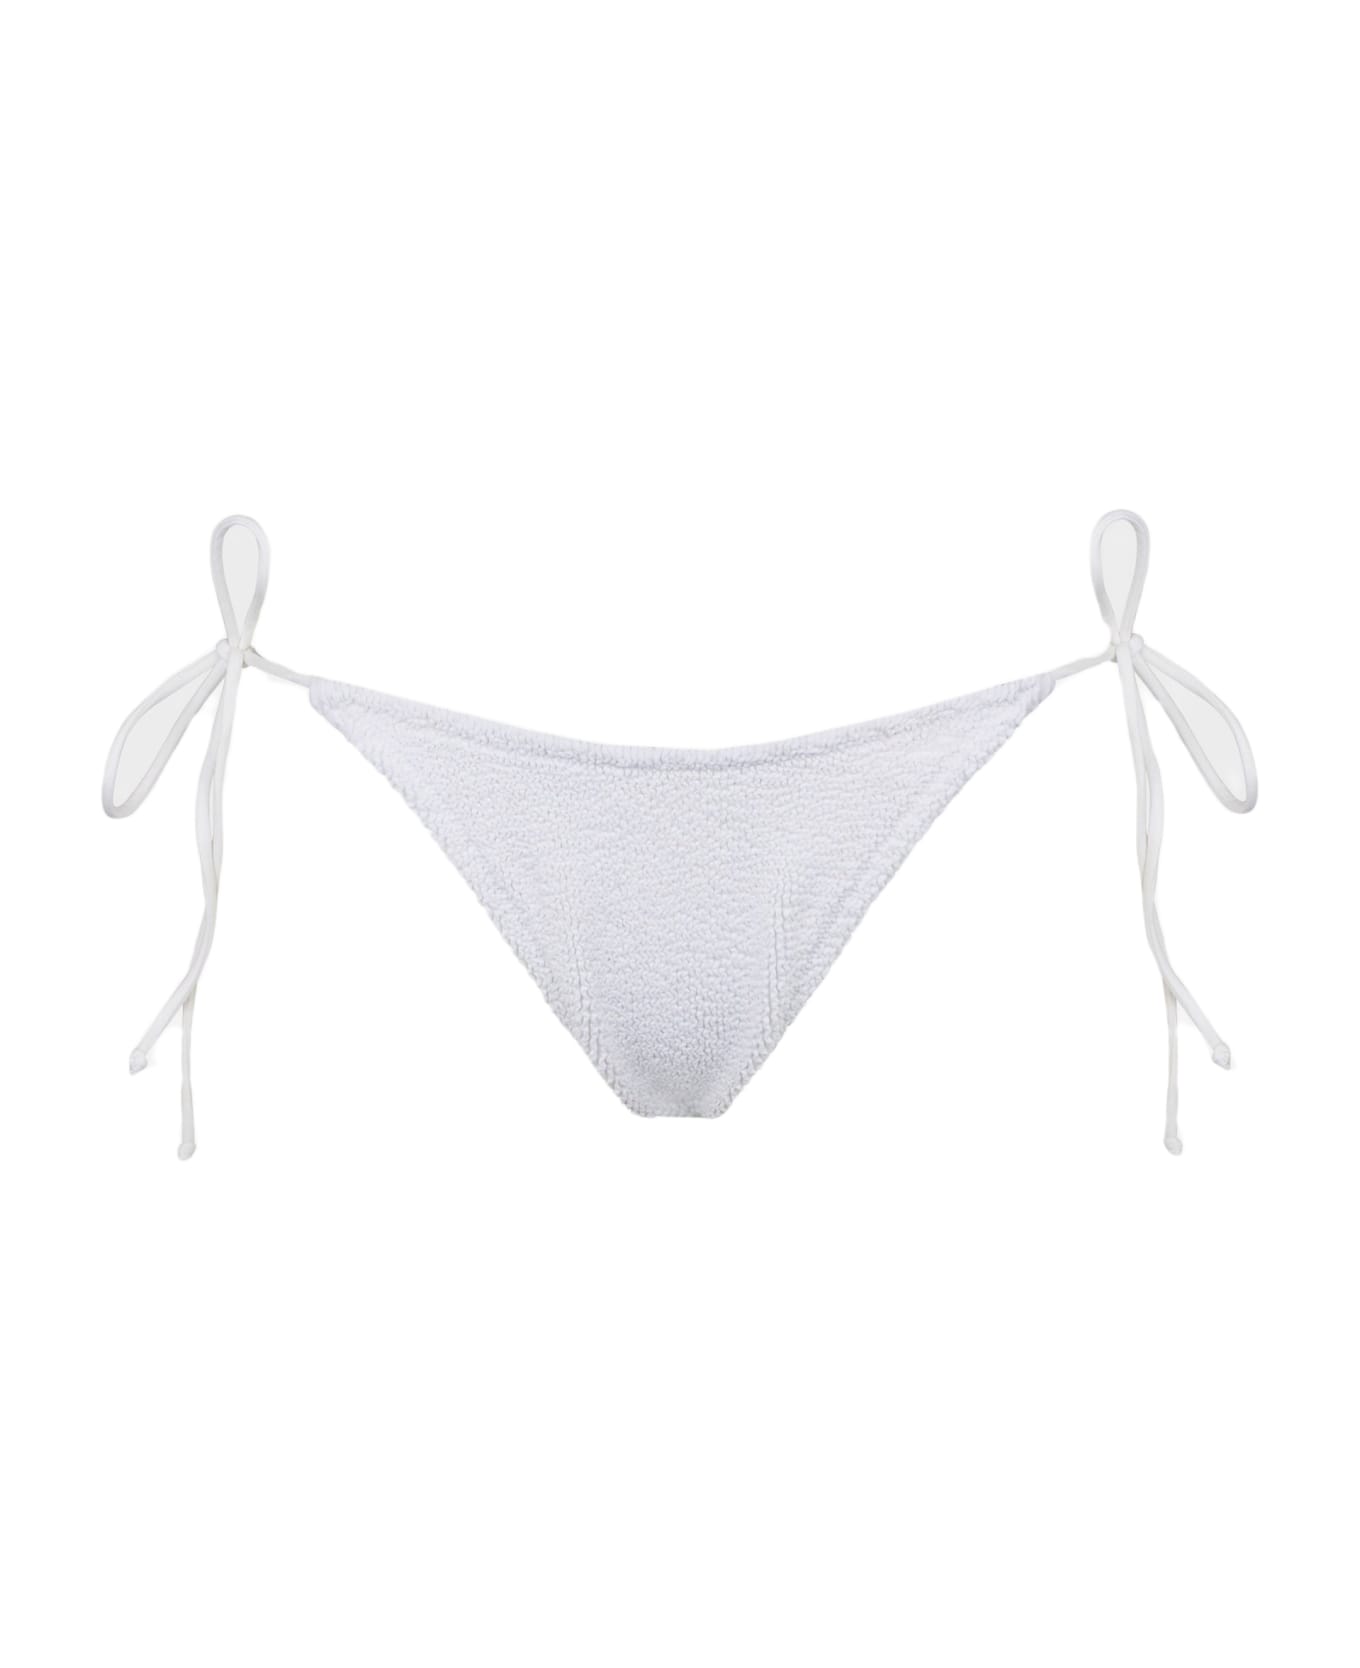 MC2 Saint Barth Woman White Crinkle Swim Briefs With Side Laces - WHITE ボトムス